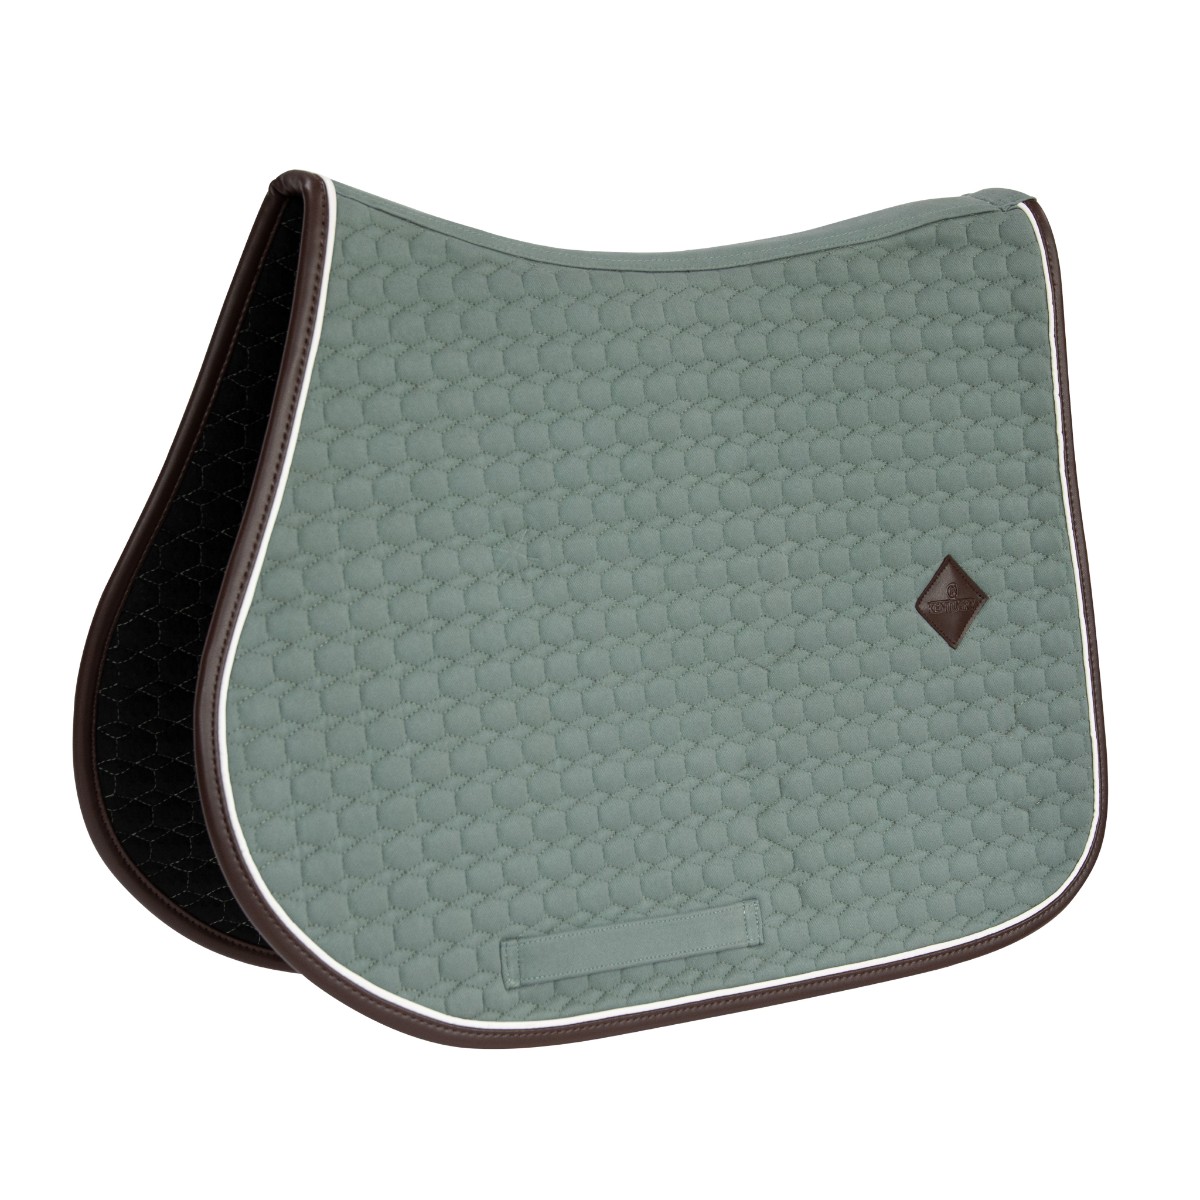 tapis classic leather Jumping Dusty Green Kentucky Horsewear Sellerie En Cadence Montfort l'Amaury textile cheval saddle pad